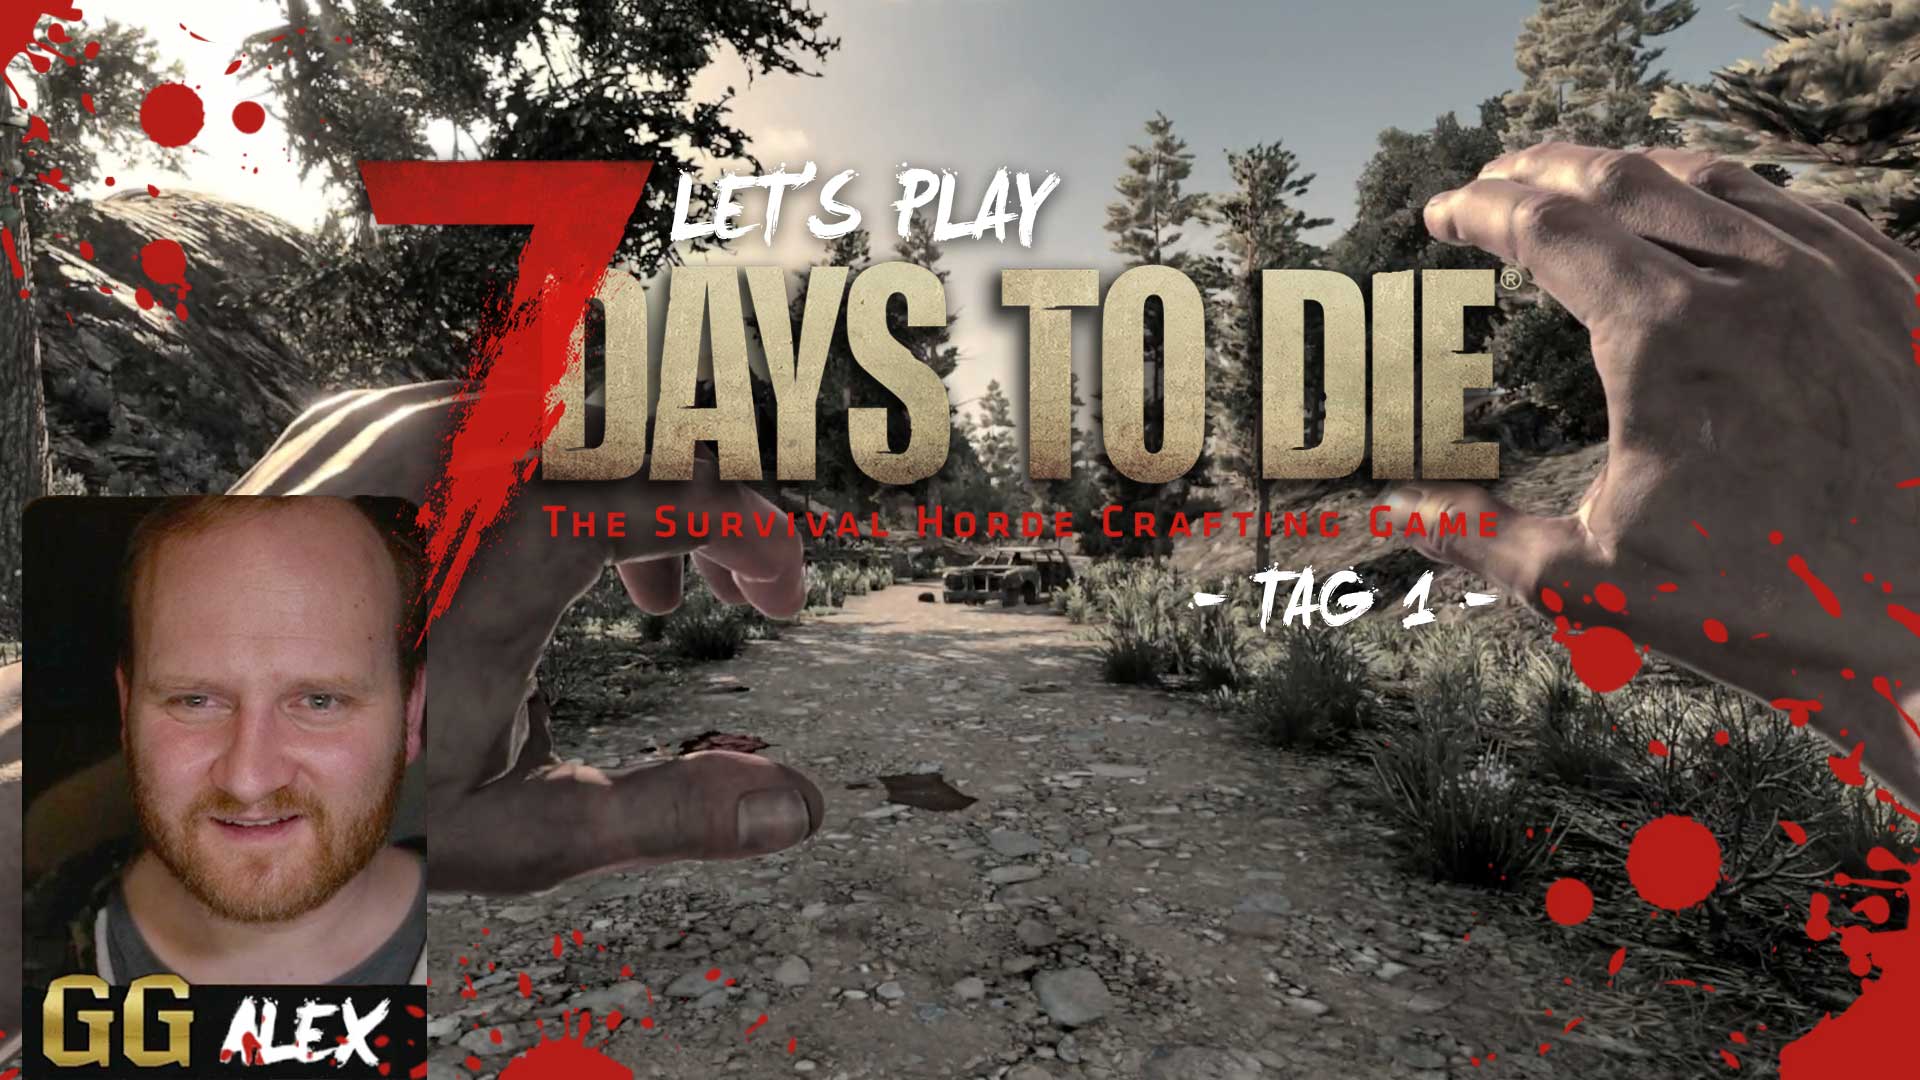 lets play 7 days to die tag 1 GG v2